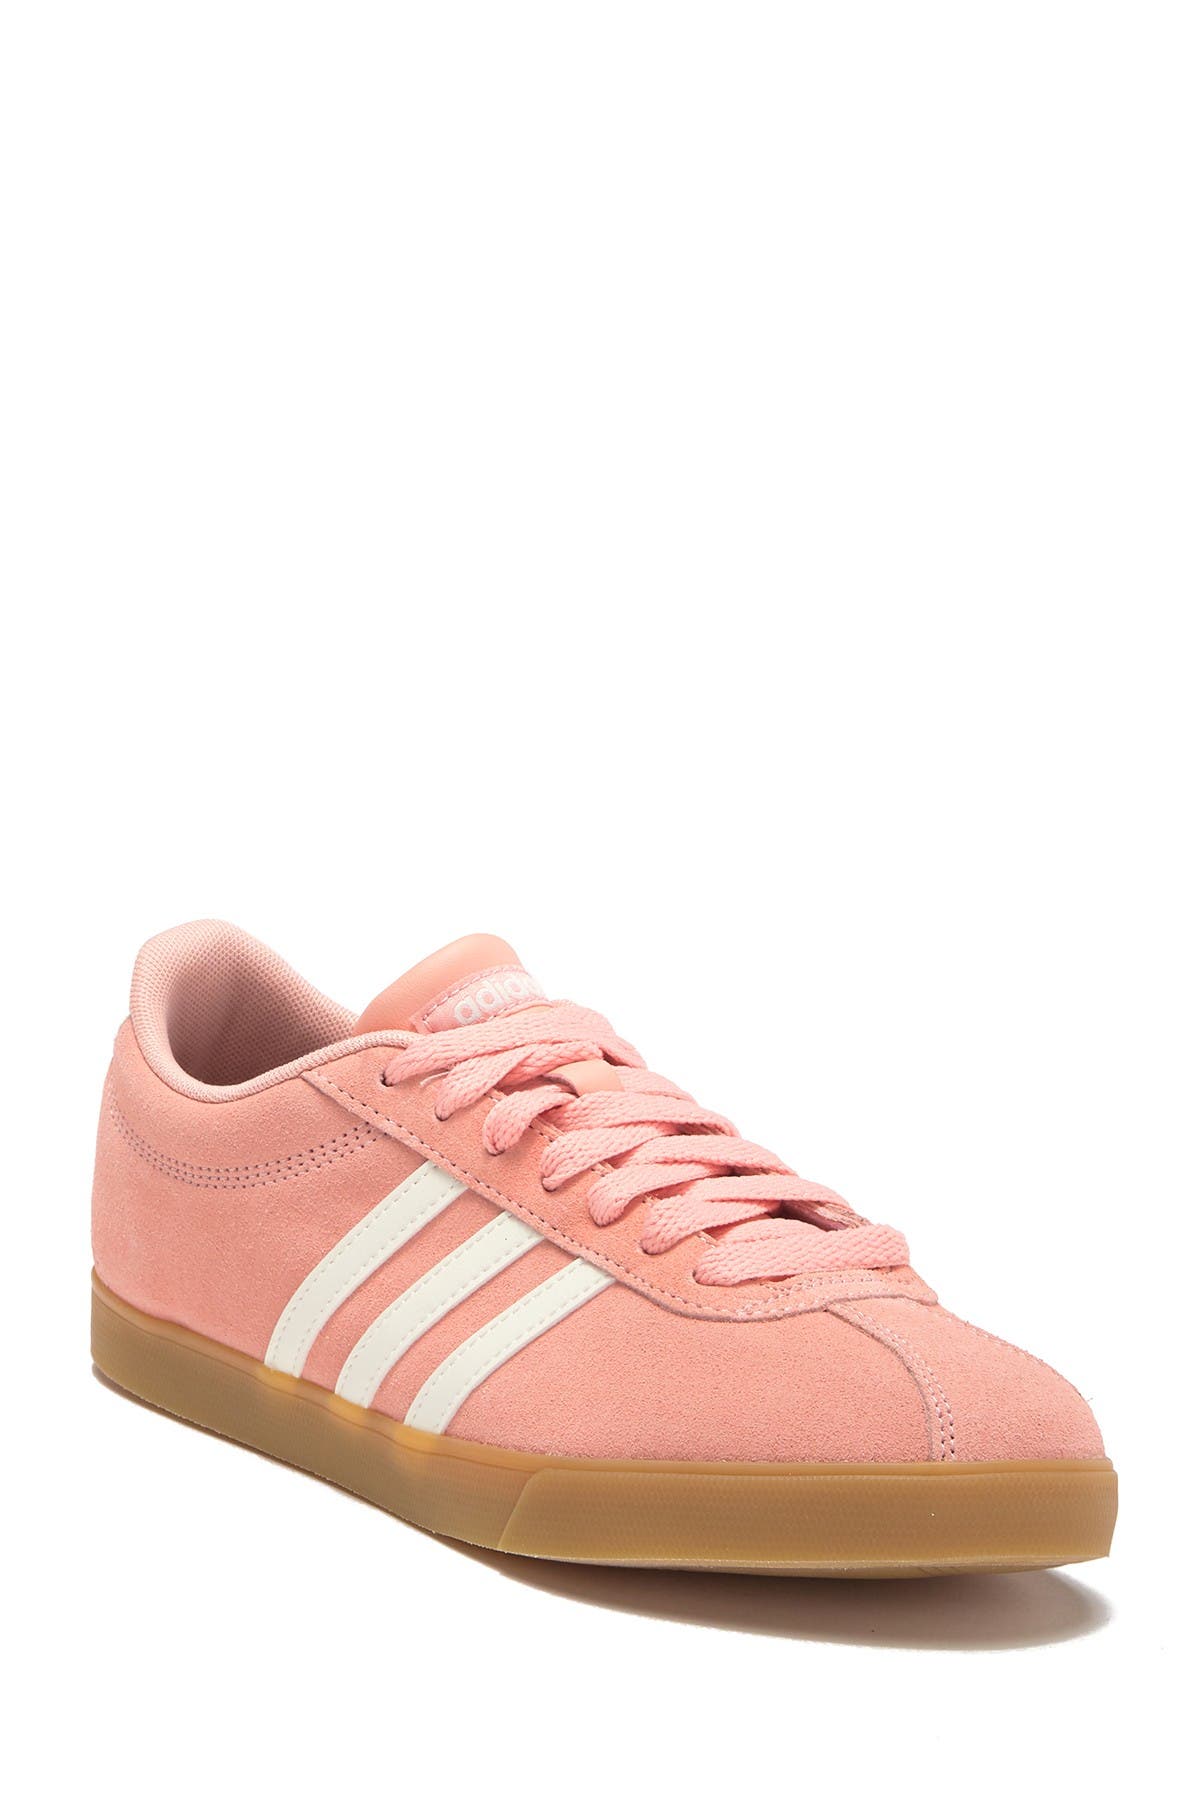 adidas courtset suede shoes